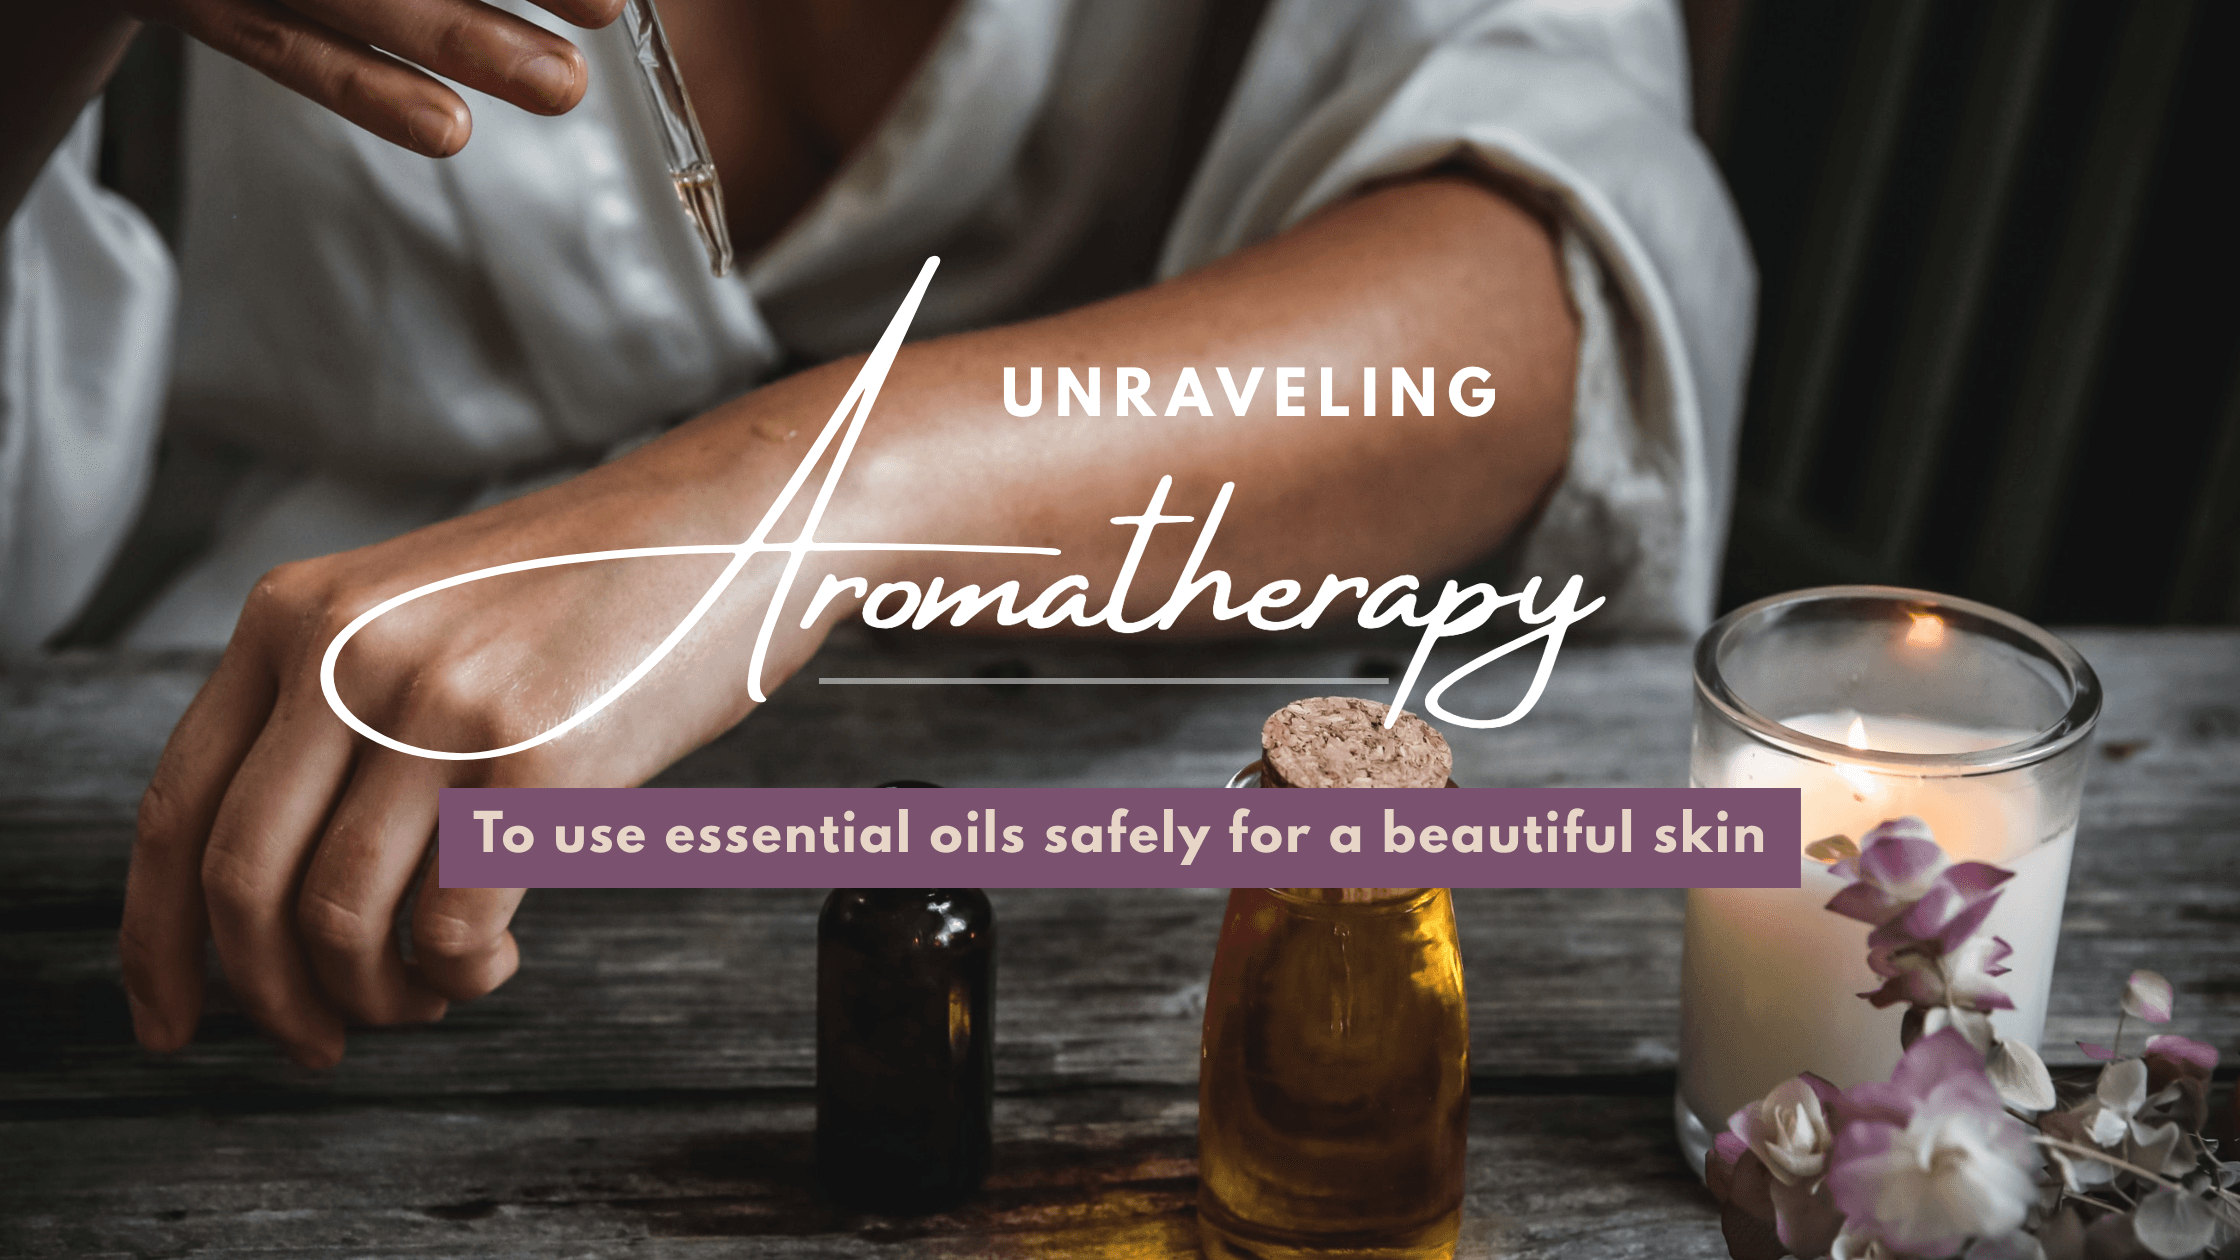 candle-and-oil-bottles-on-table-unravelling-aromatherapy-blog-banner-template-thumbnail-img